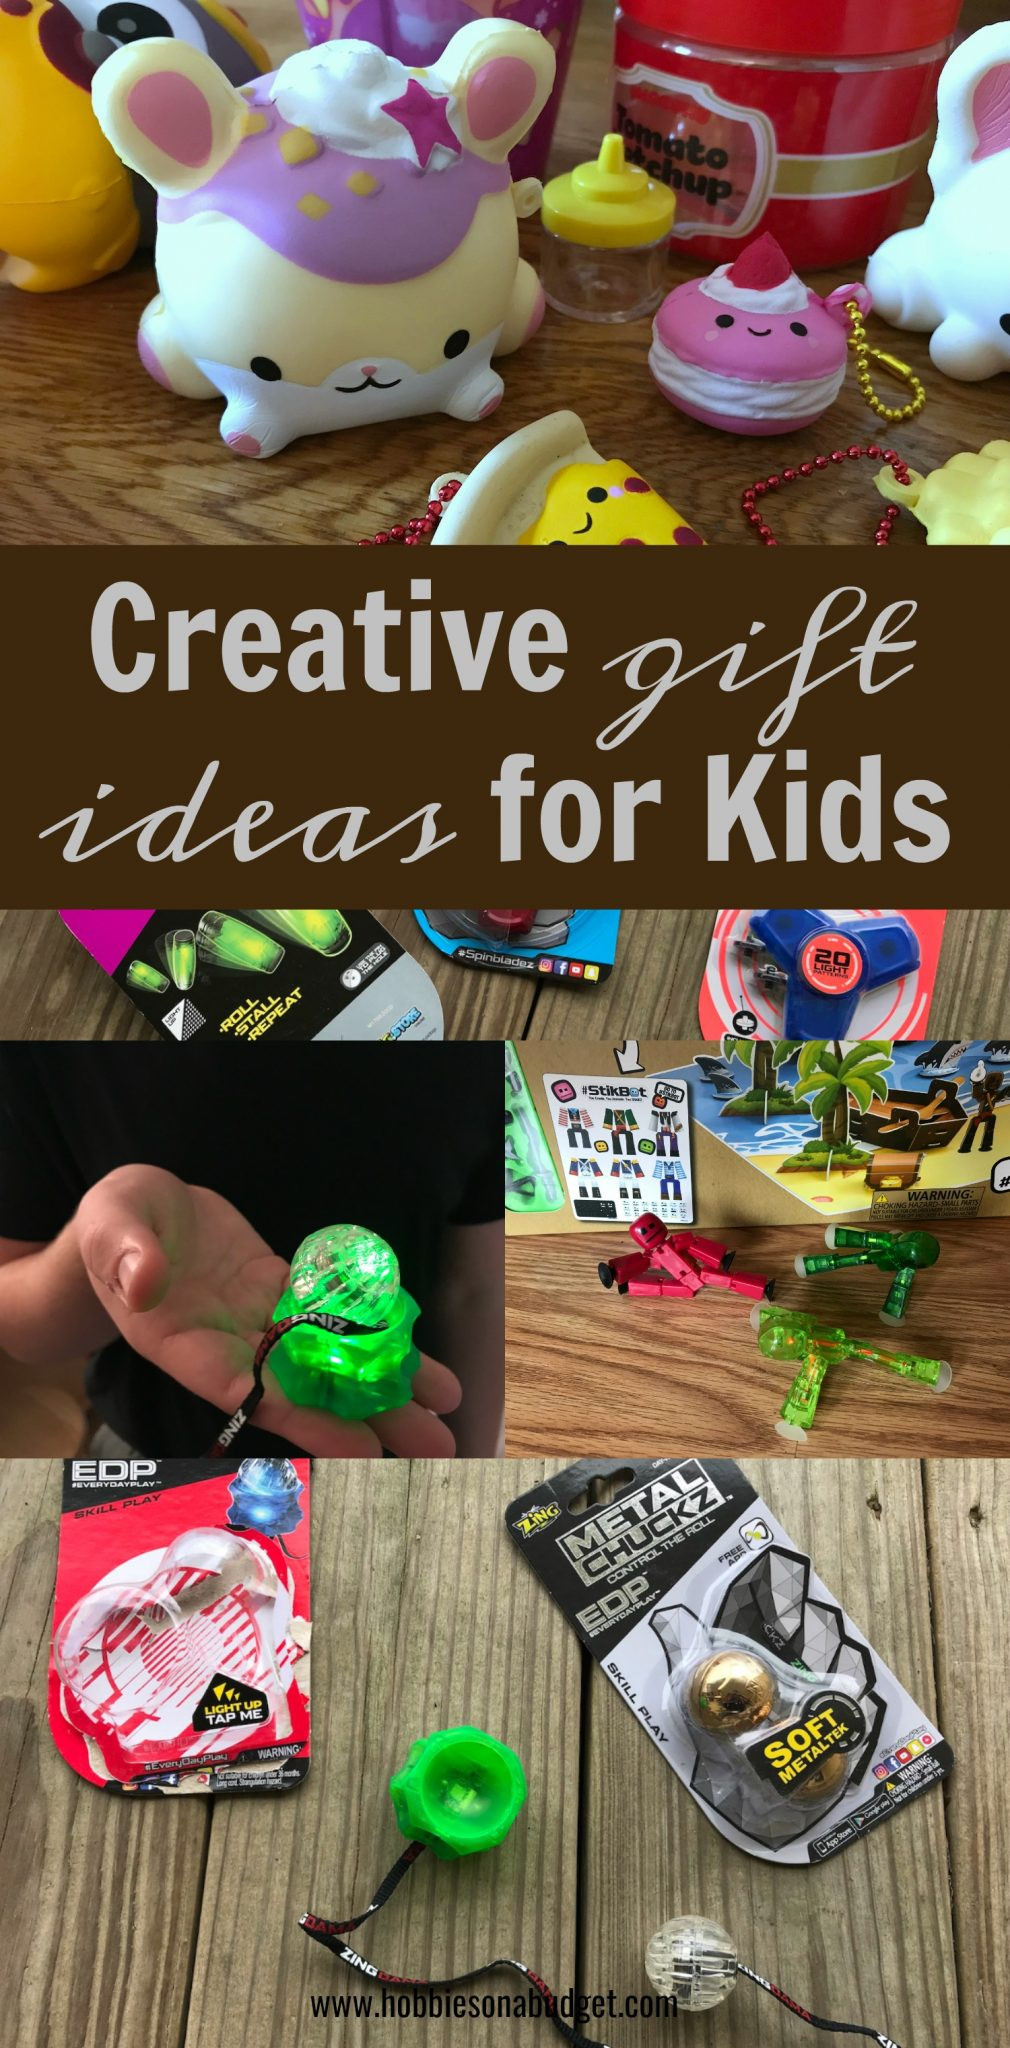 Creative Gifts For Children
 Creative Gift Ideas for Kids Hobbies on a Bud